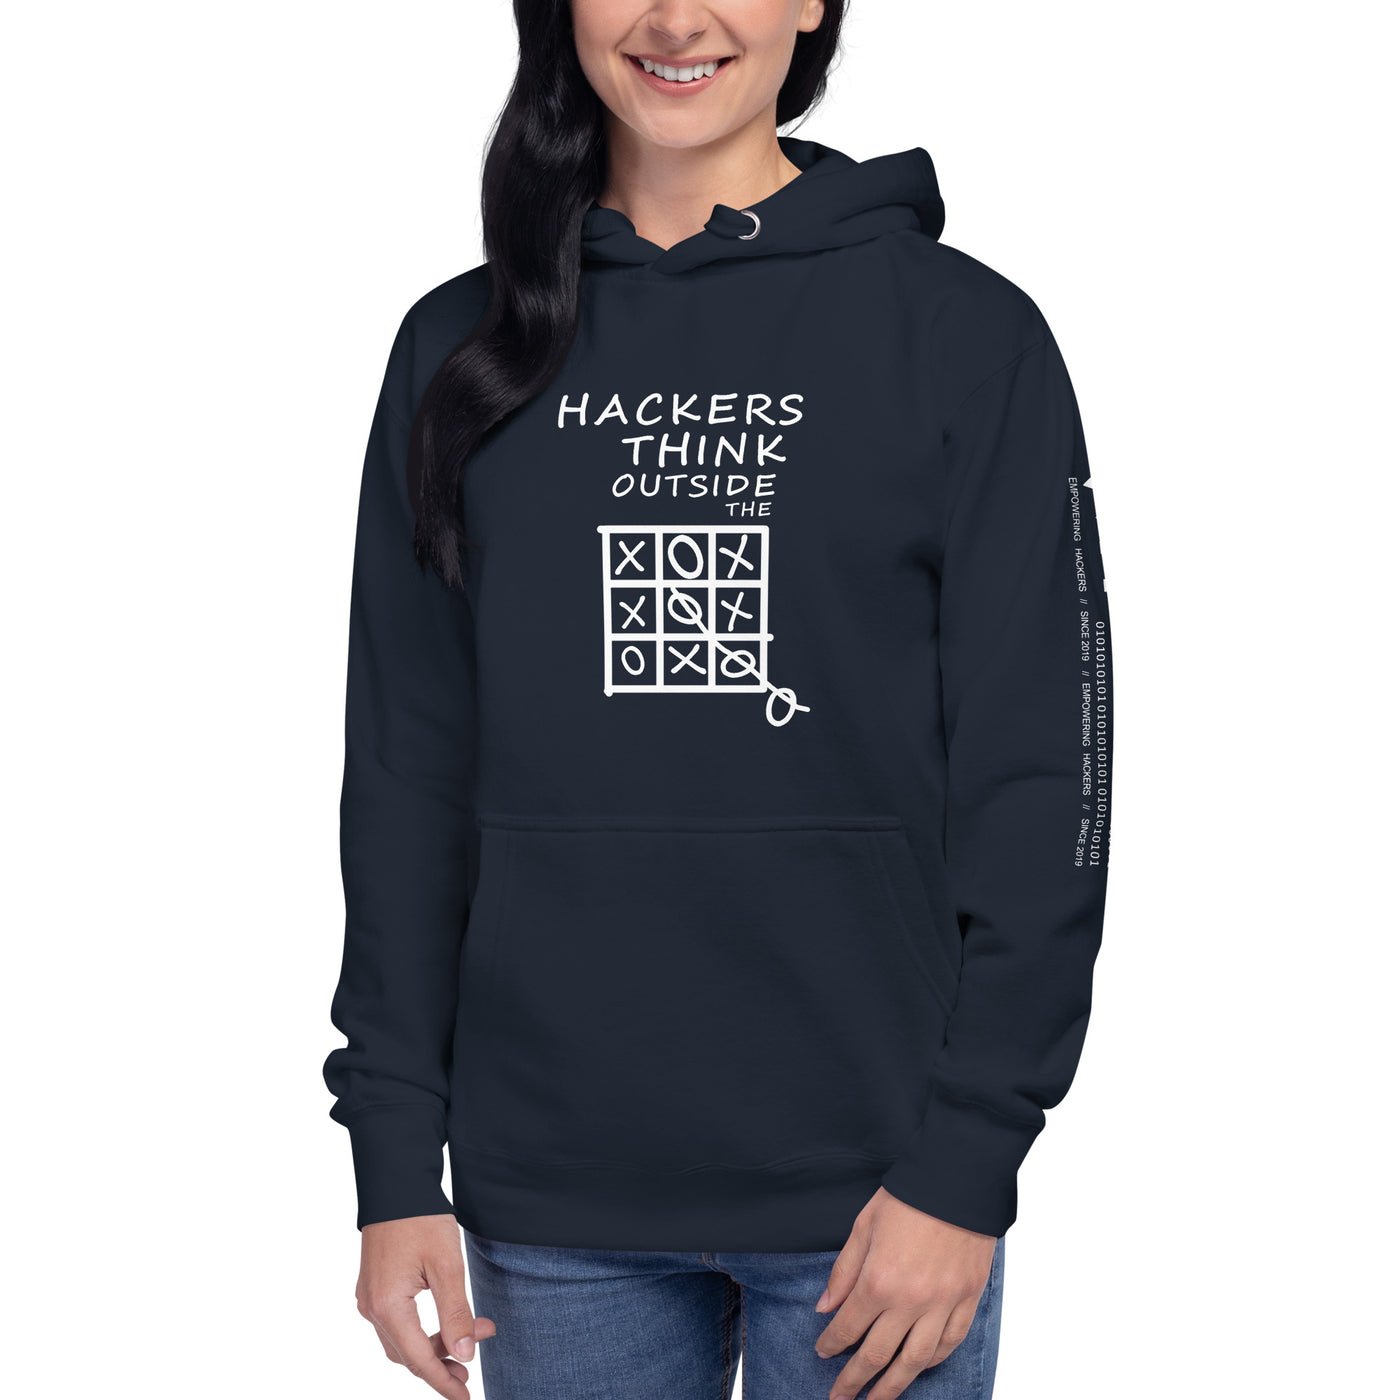 Hackers think outside the box - Unisex Hoodie